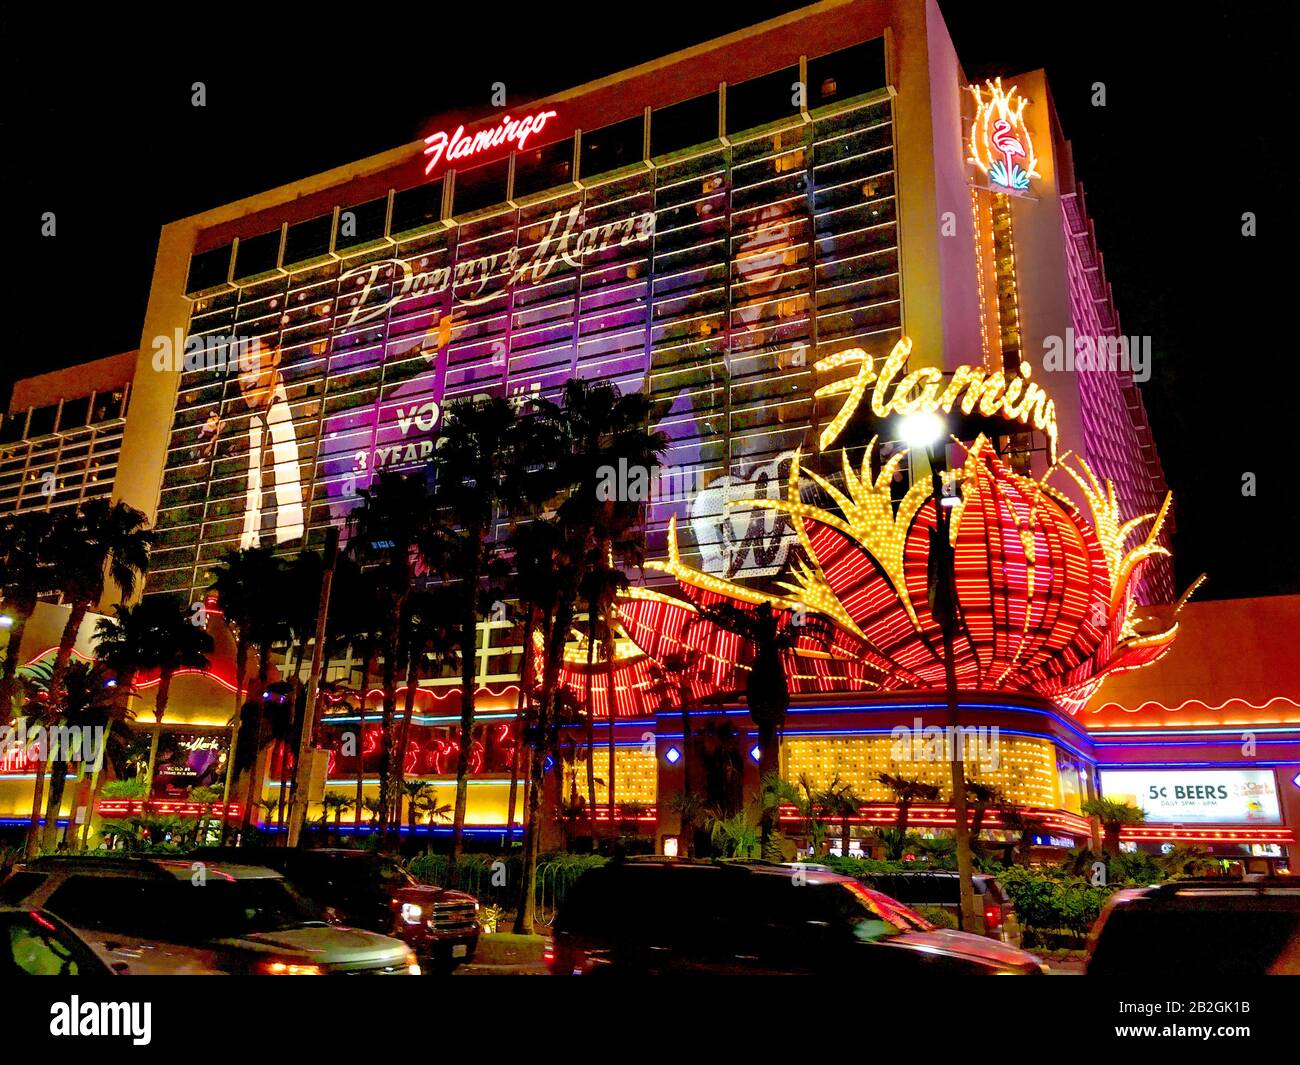 Donny and Marie Osmond appear at the Flamingo casino and hotel, Las Vegas Strip, Las Vegas, Nevada, United States of America. Stock Photo